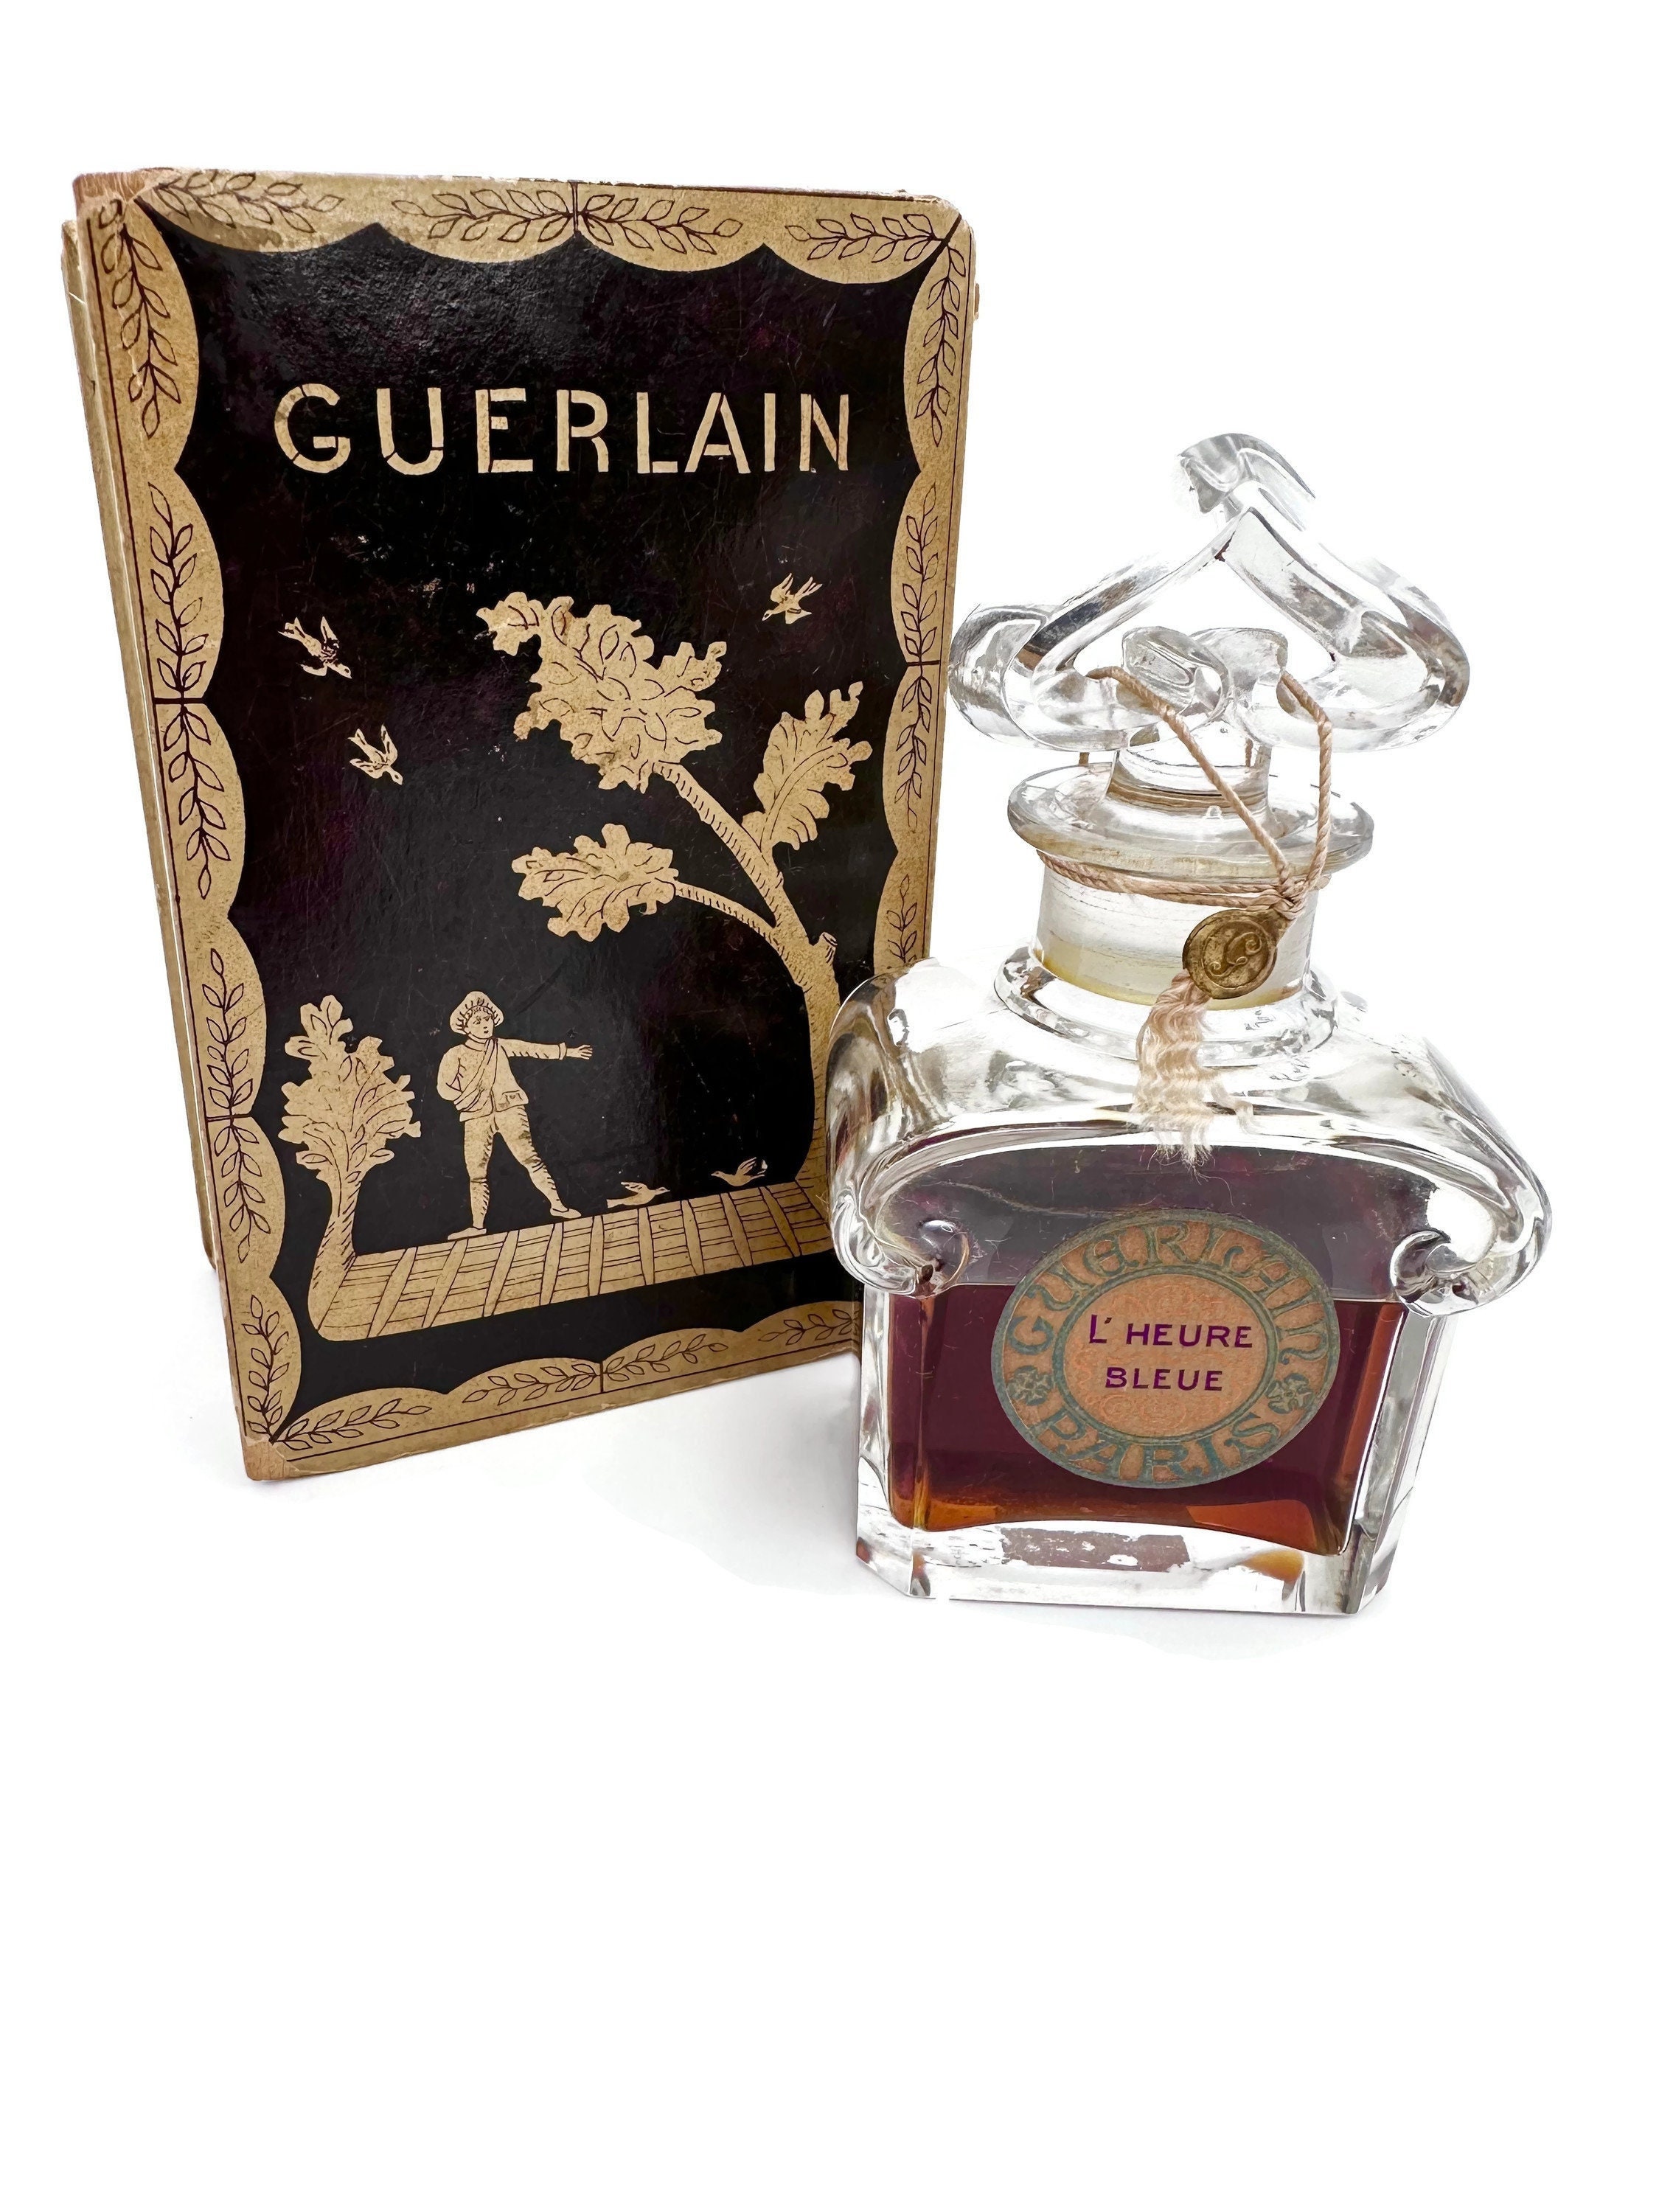 L'Heure Bleue Extract Guerlain perfume - a fragrance for women 1912